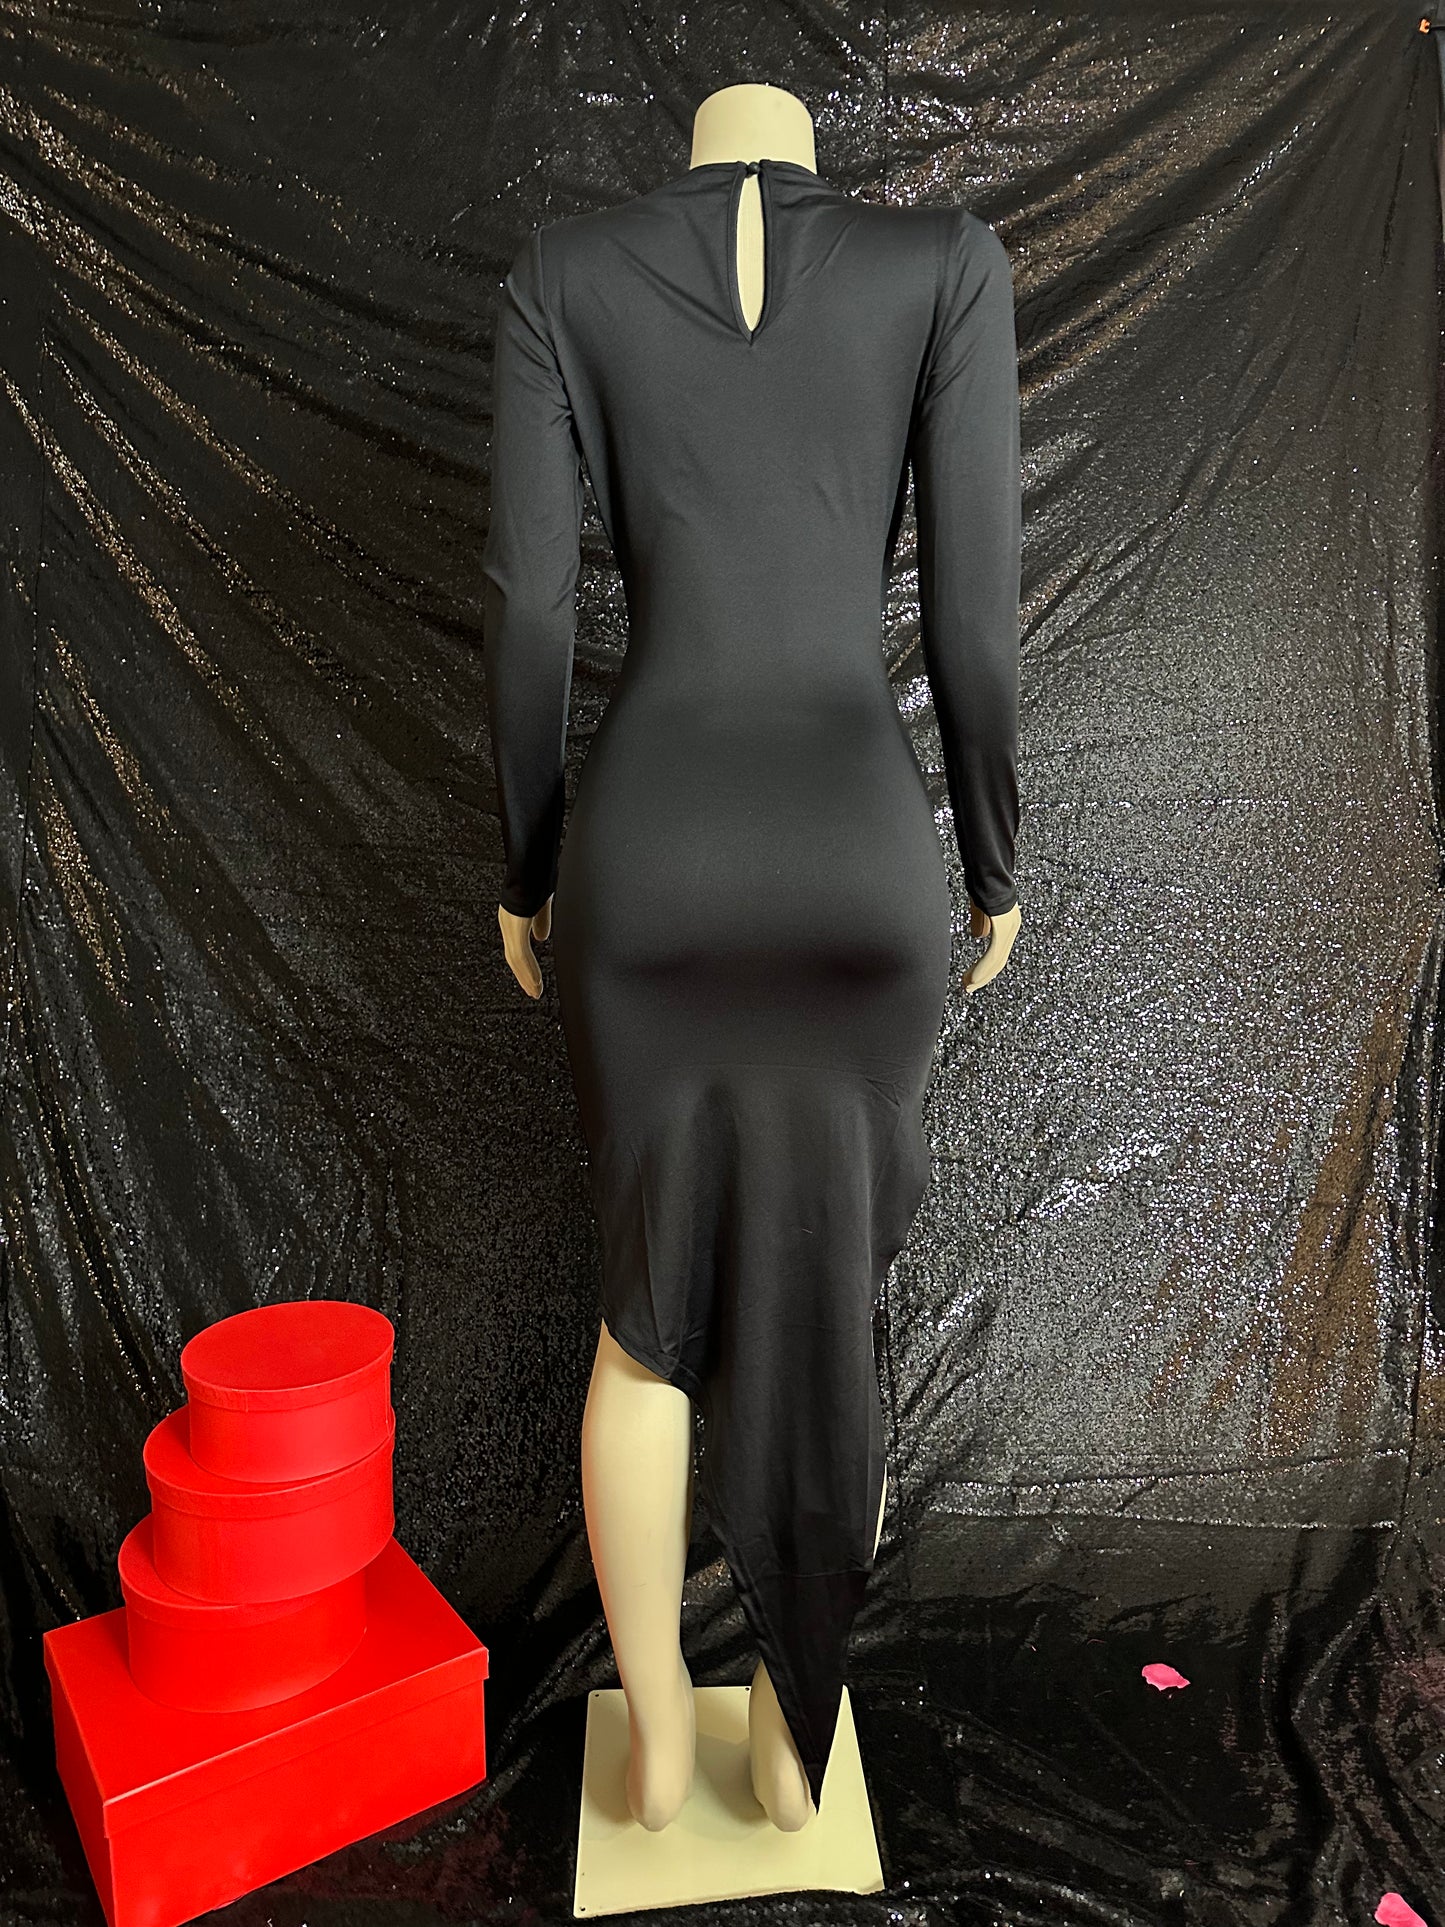 The Love Collection Date Night Sexy Black Dress